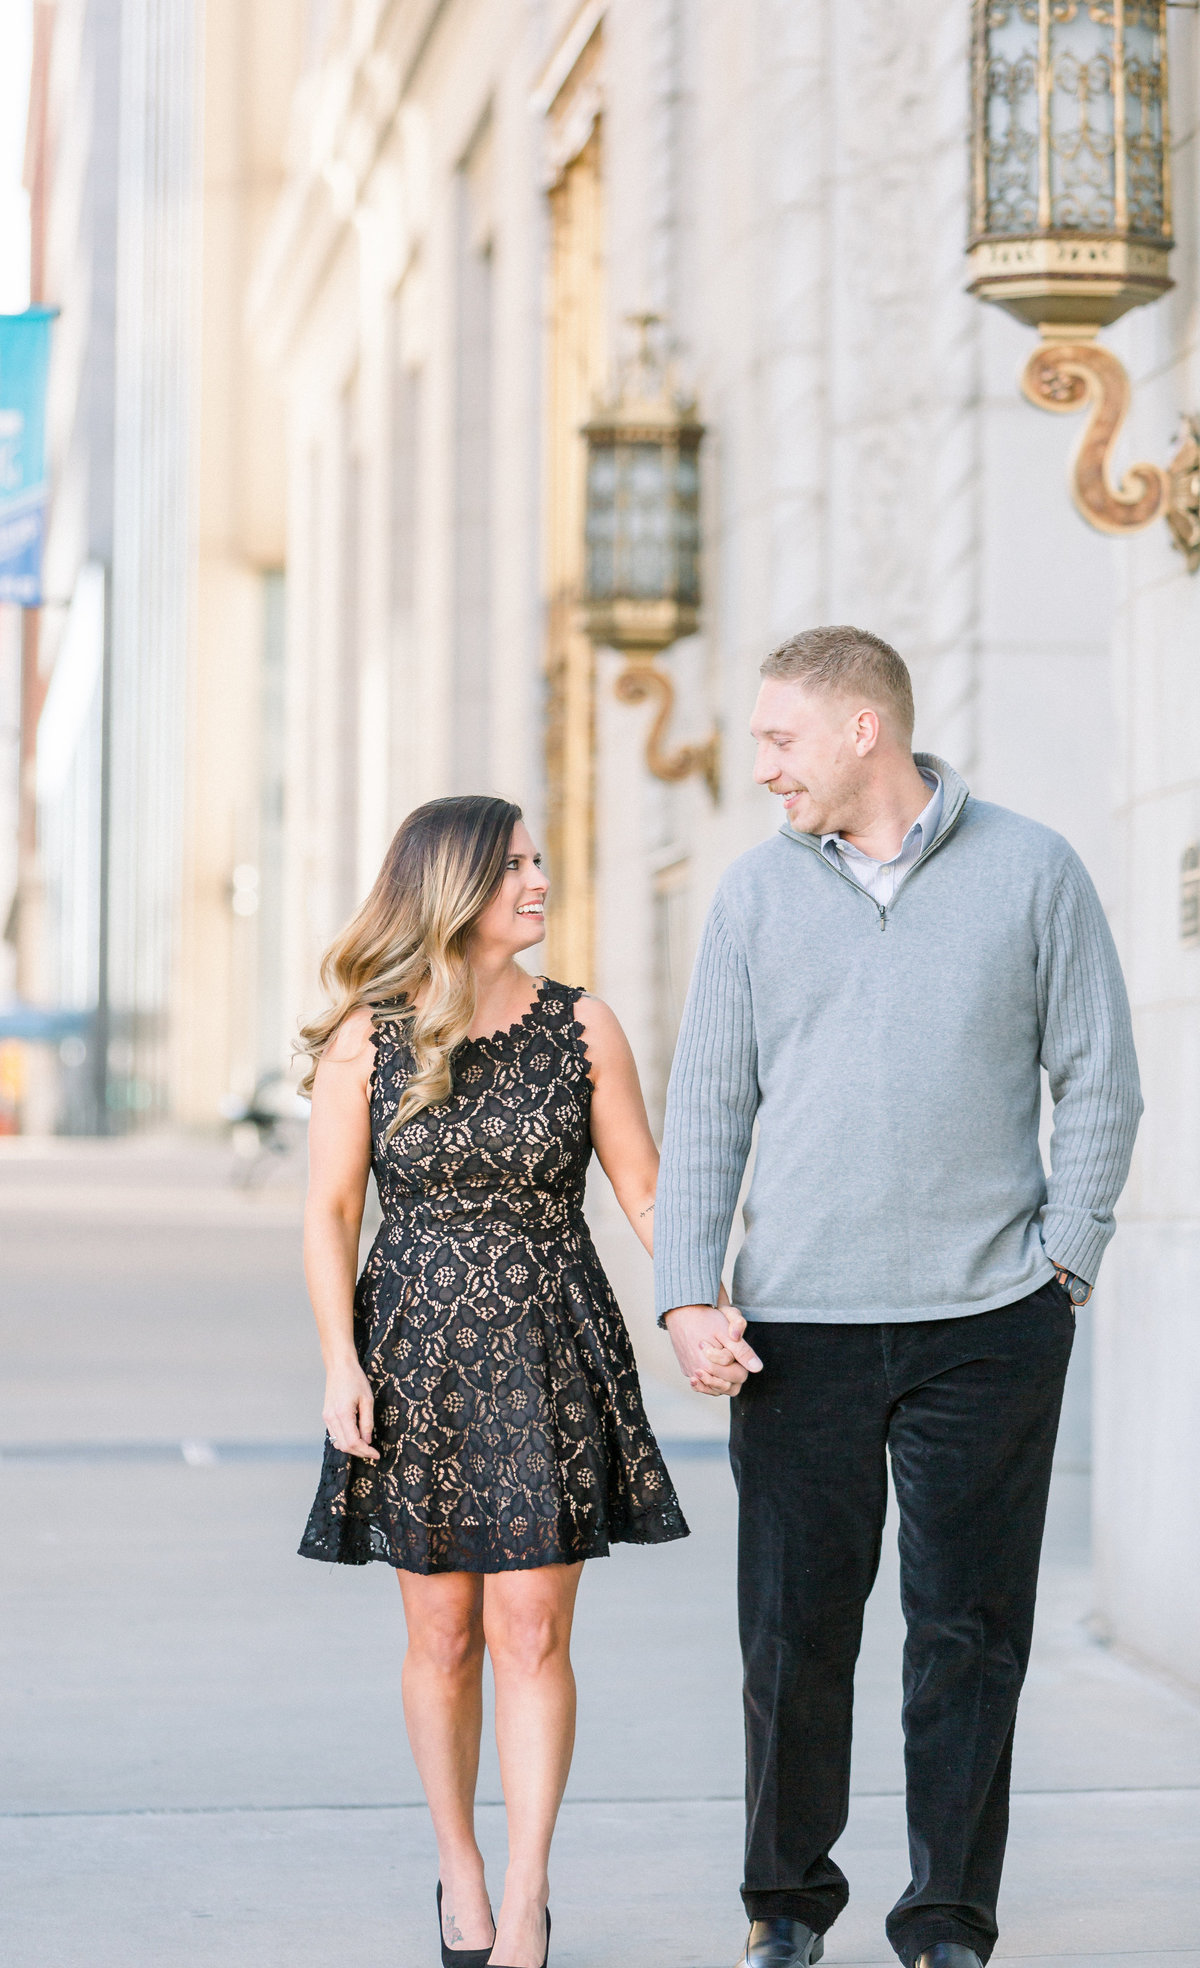 Galleries-Nathan and Jaime Engagement Session-0006